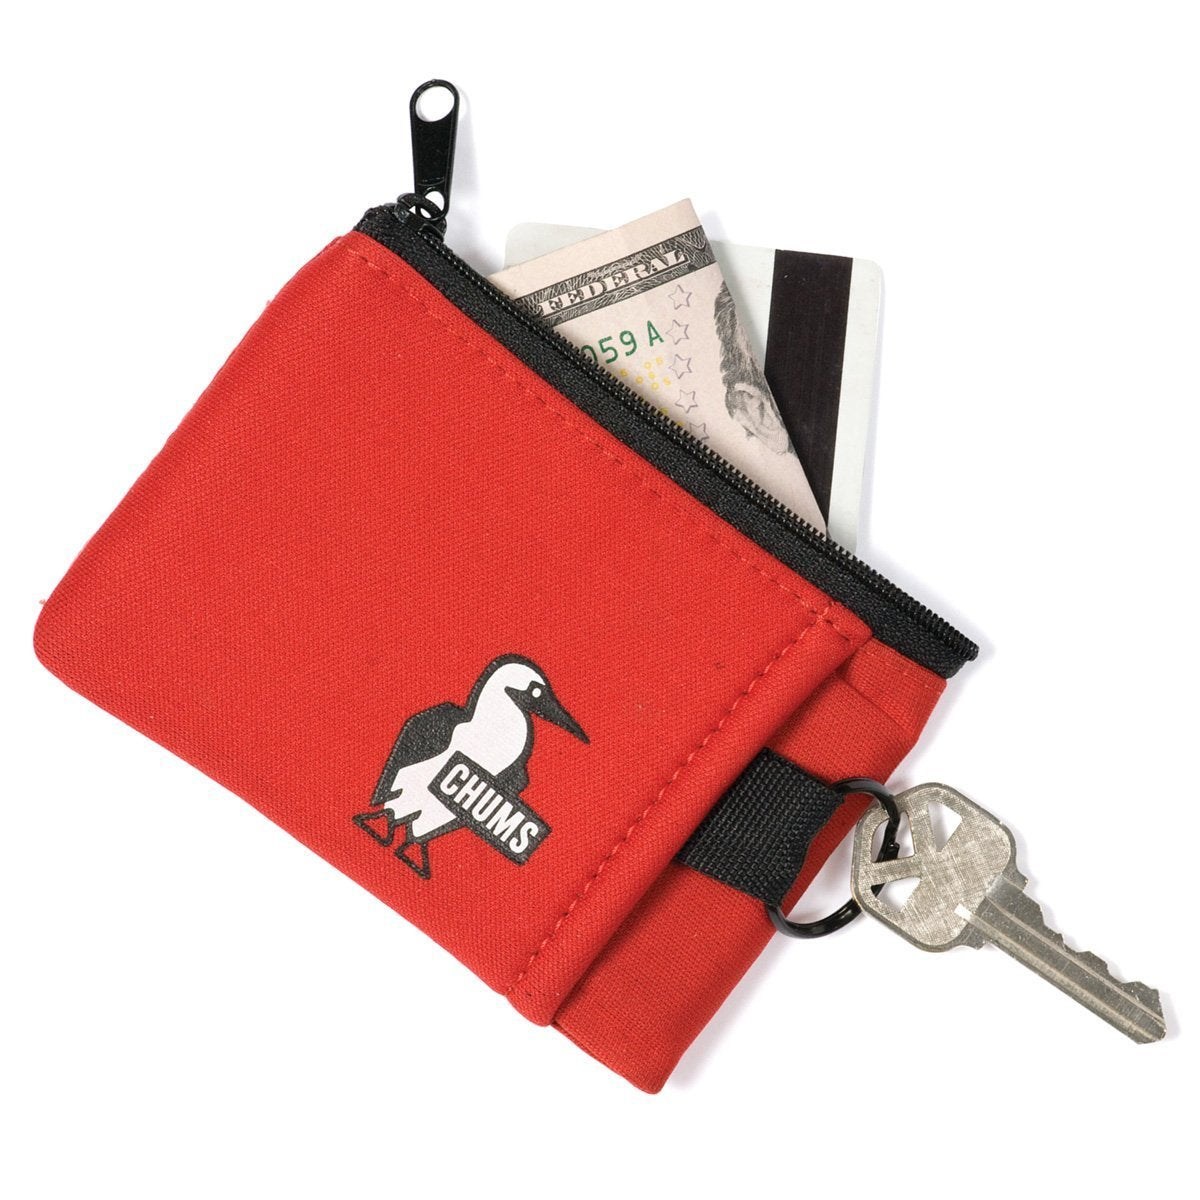 Chums Floating Marsupial Keychain Wallet